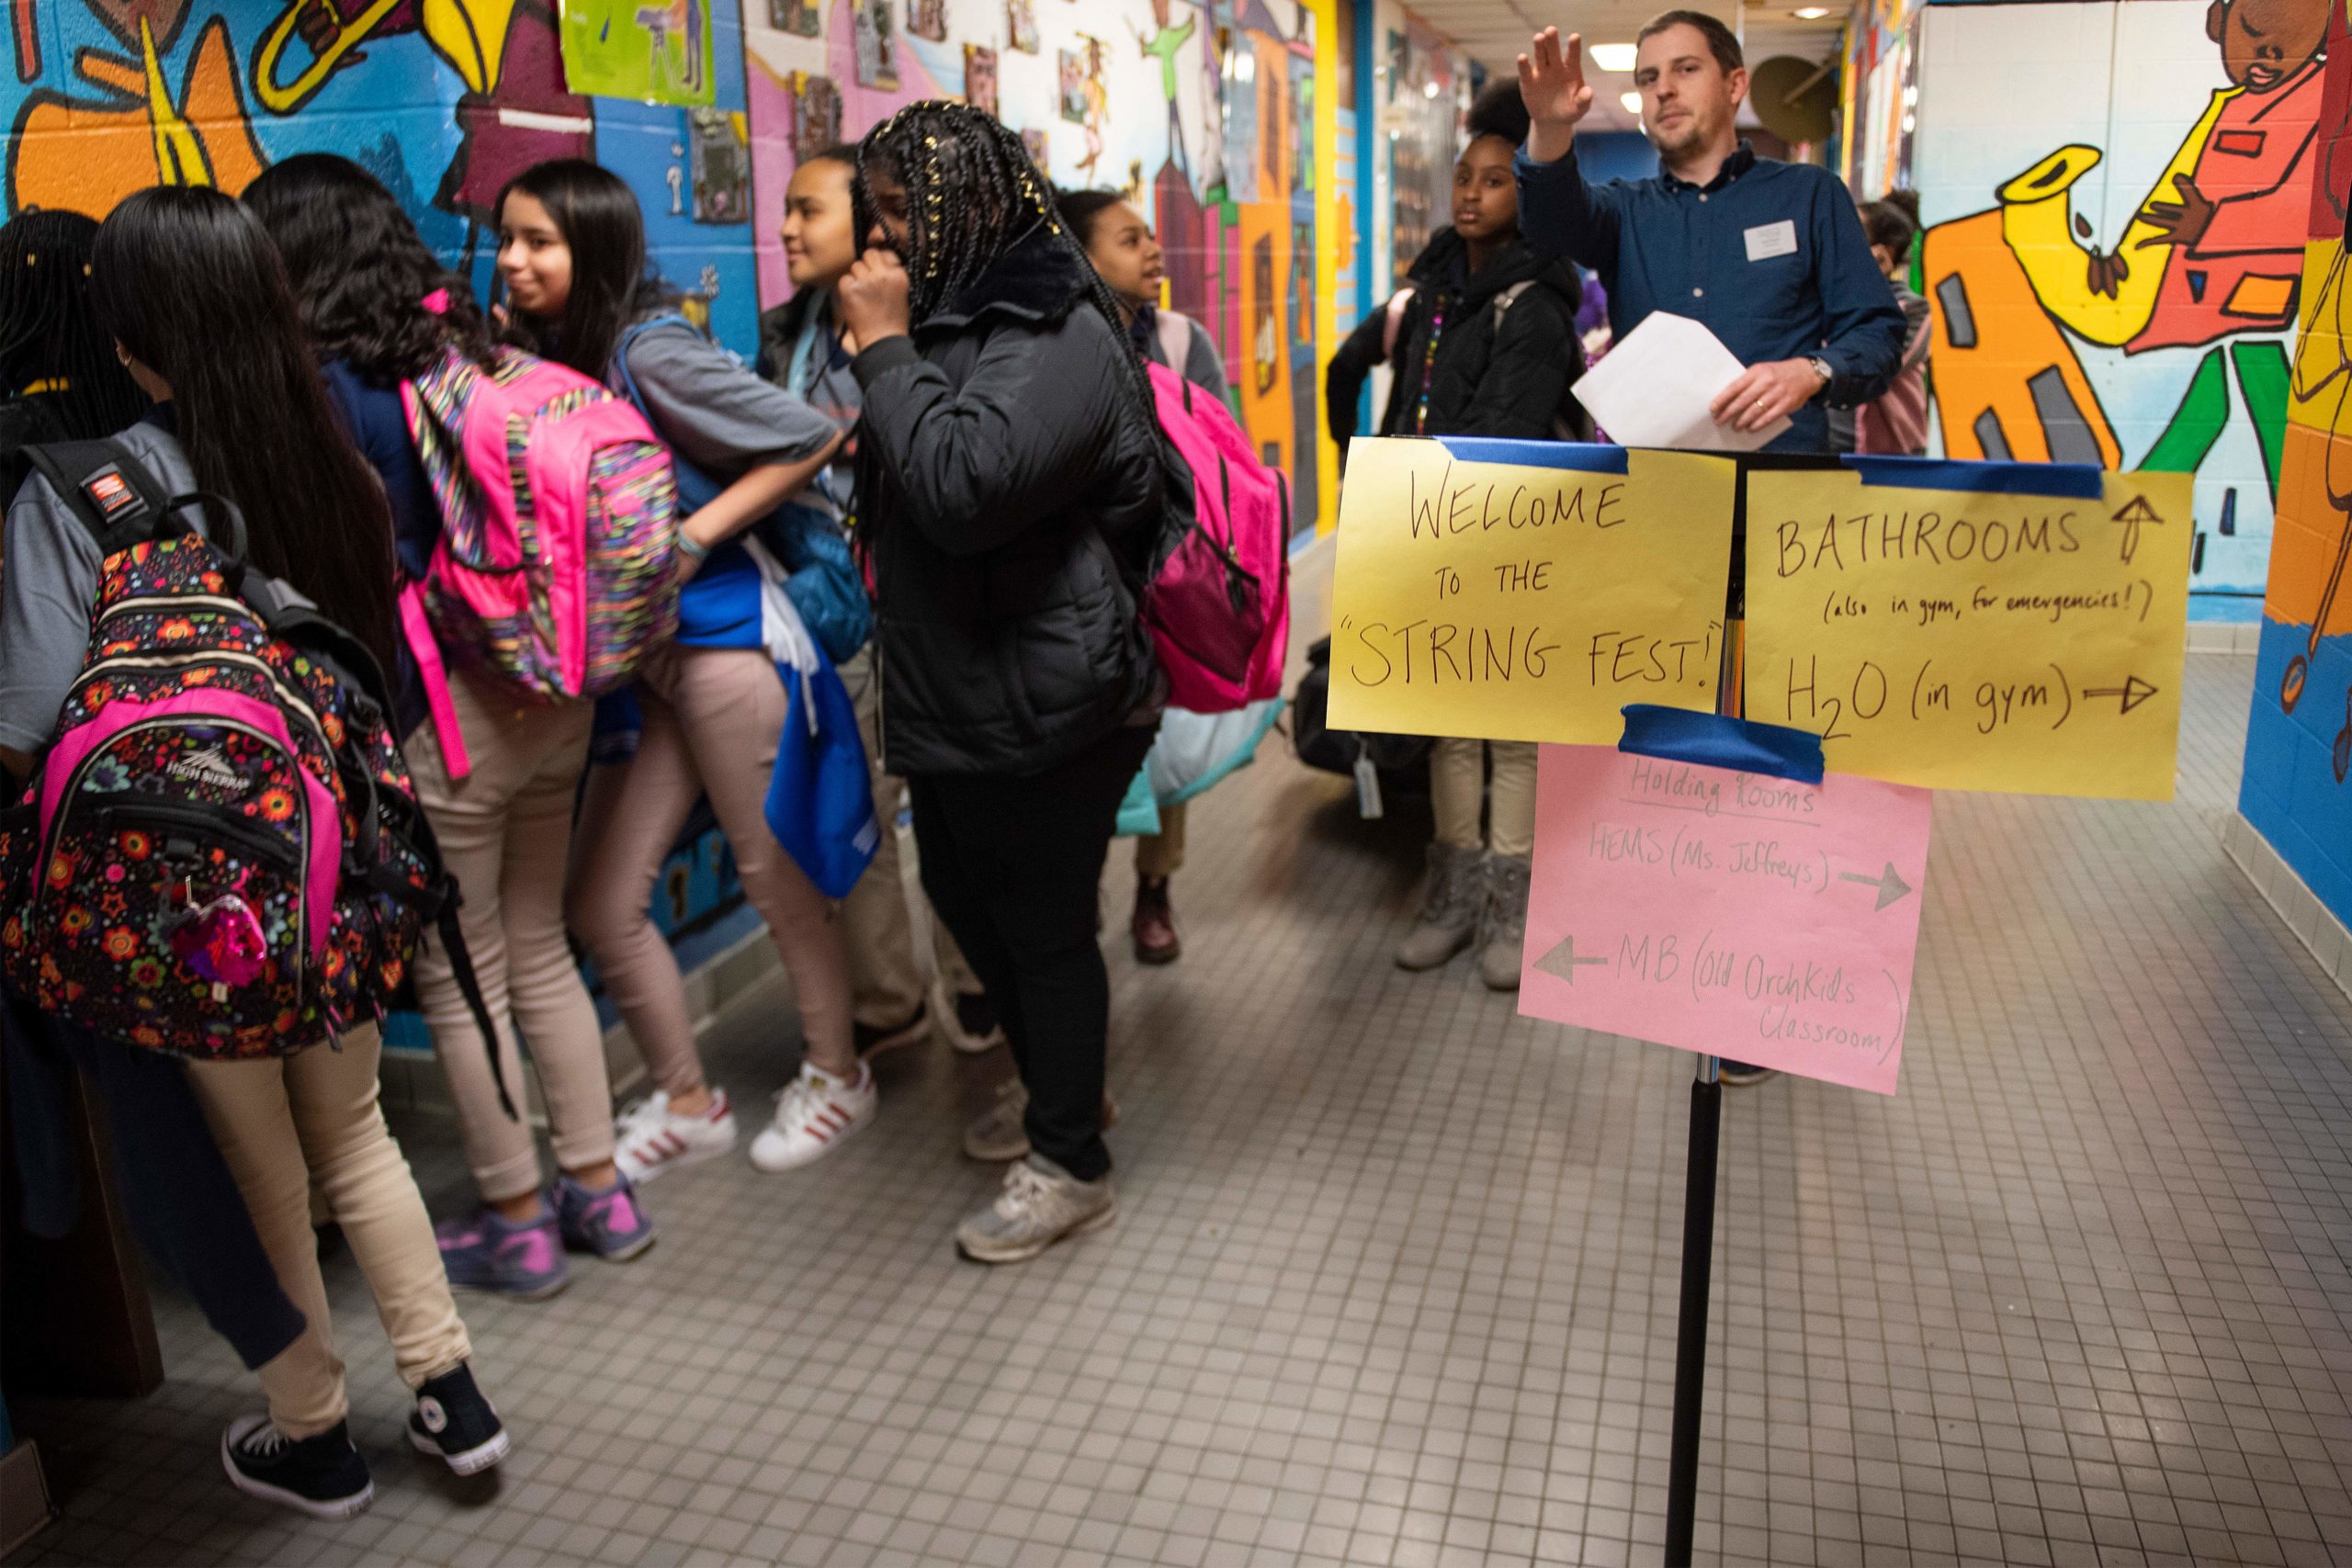 A teacher directs students to their rooms to get their instruments for the Baltimore Symphony Orchestra's OrchKids program during the String Fling concert at the Lockerman Bundy Elementary School in Baltimore, Maryland, on March 12, 2019. - As the conductor raises her baton, dozens of children come to order, and their everyday cacophonous chatting gives way to a melodic cascade of notes. The 60 or so students are part of OrchKids, a program run by the Baltimore Symphony Orchestra, which is hoping to bring change to the troubled city through the power of music. (Photo by Jim WATSON / AFP) (Photo credit should read JIM WATSON/AFP via Getty Images)